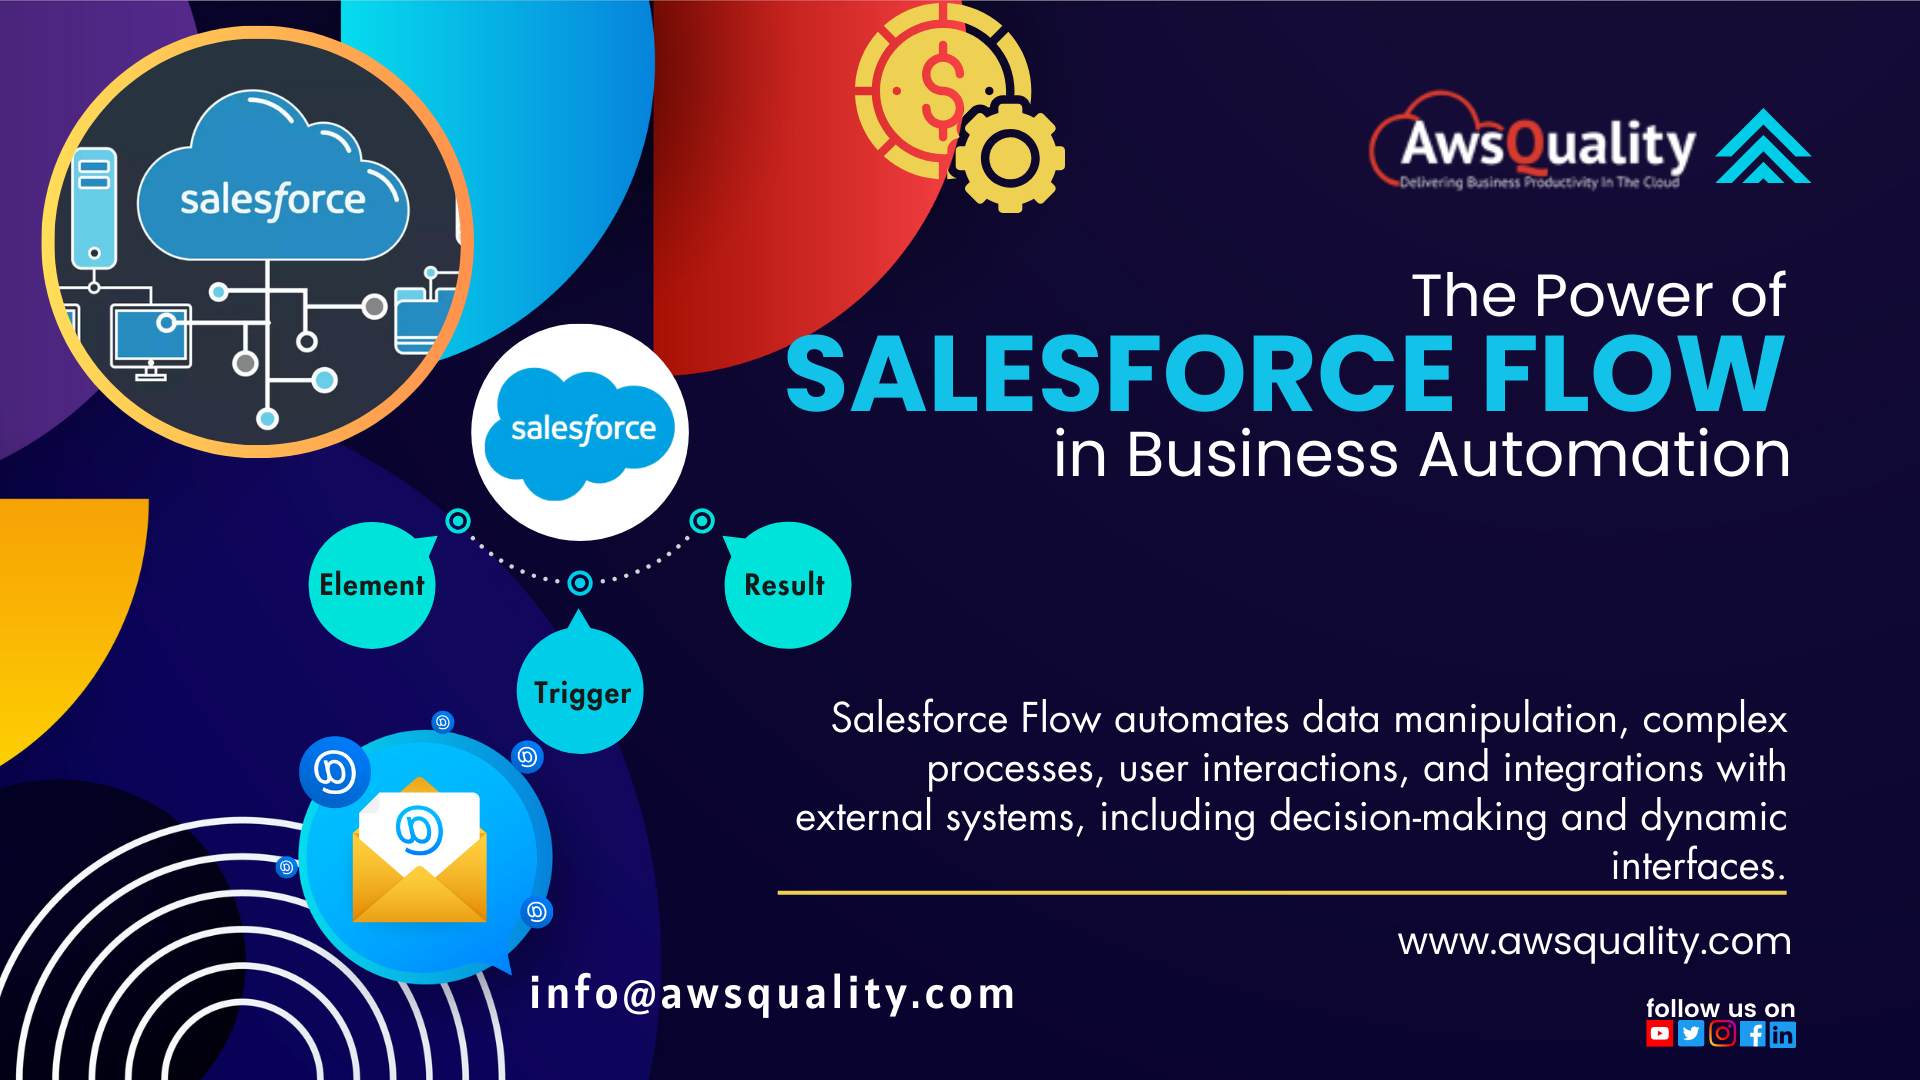 Salesforce consulting services